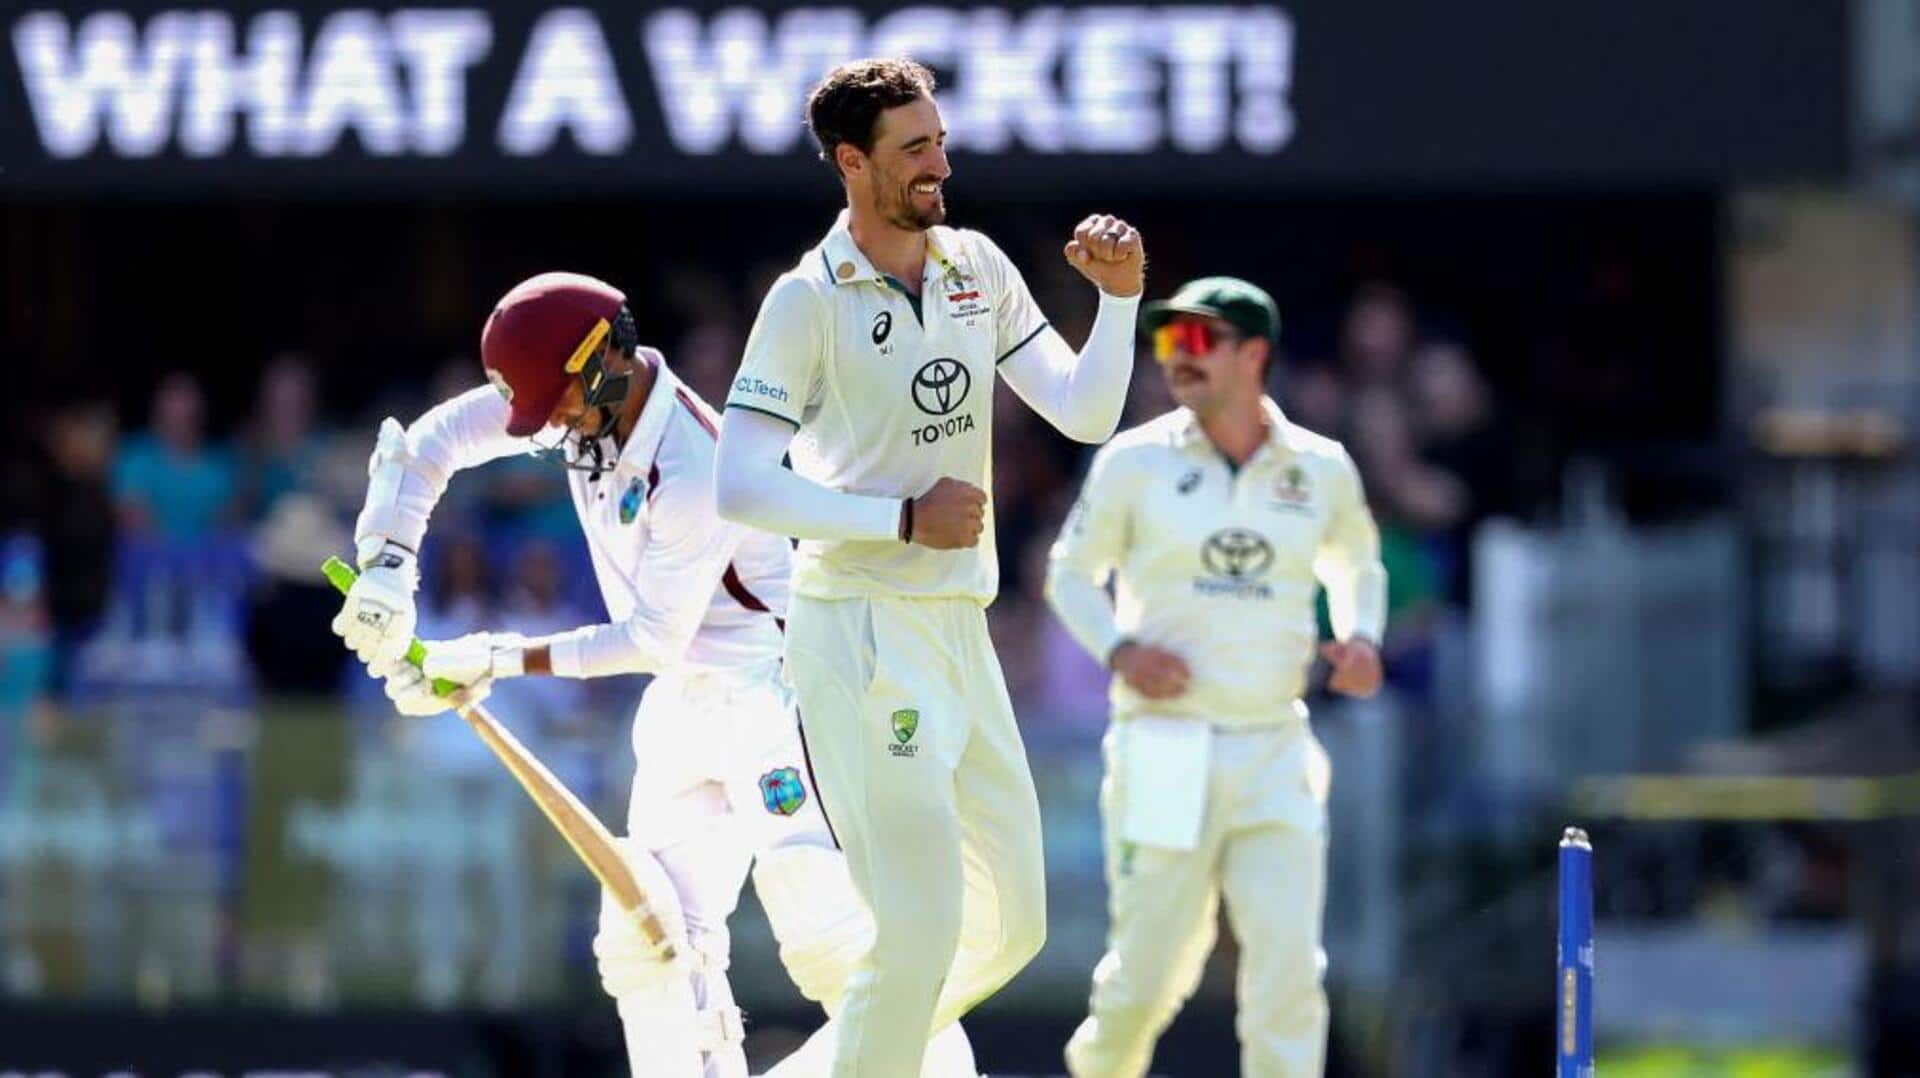 Mitchell Starc claims his second Test four-wicket haul against WI